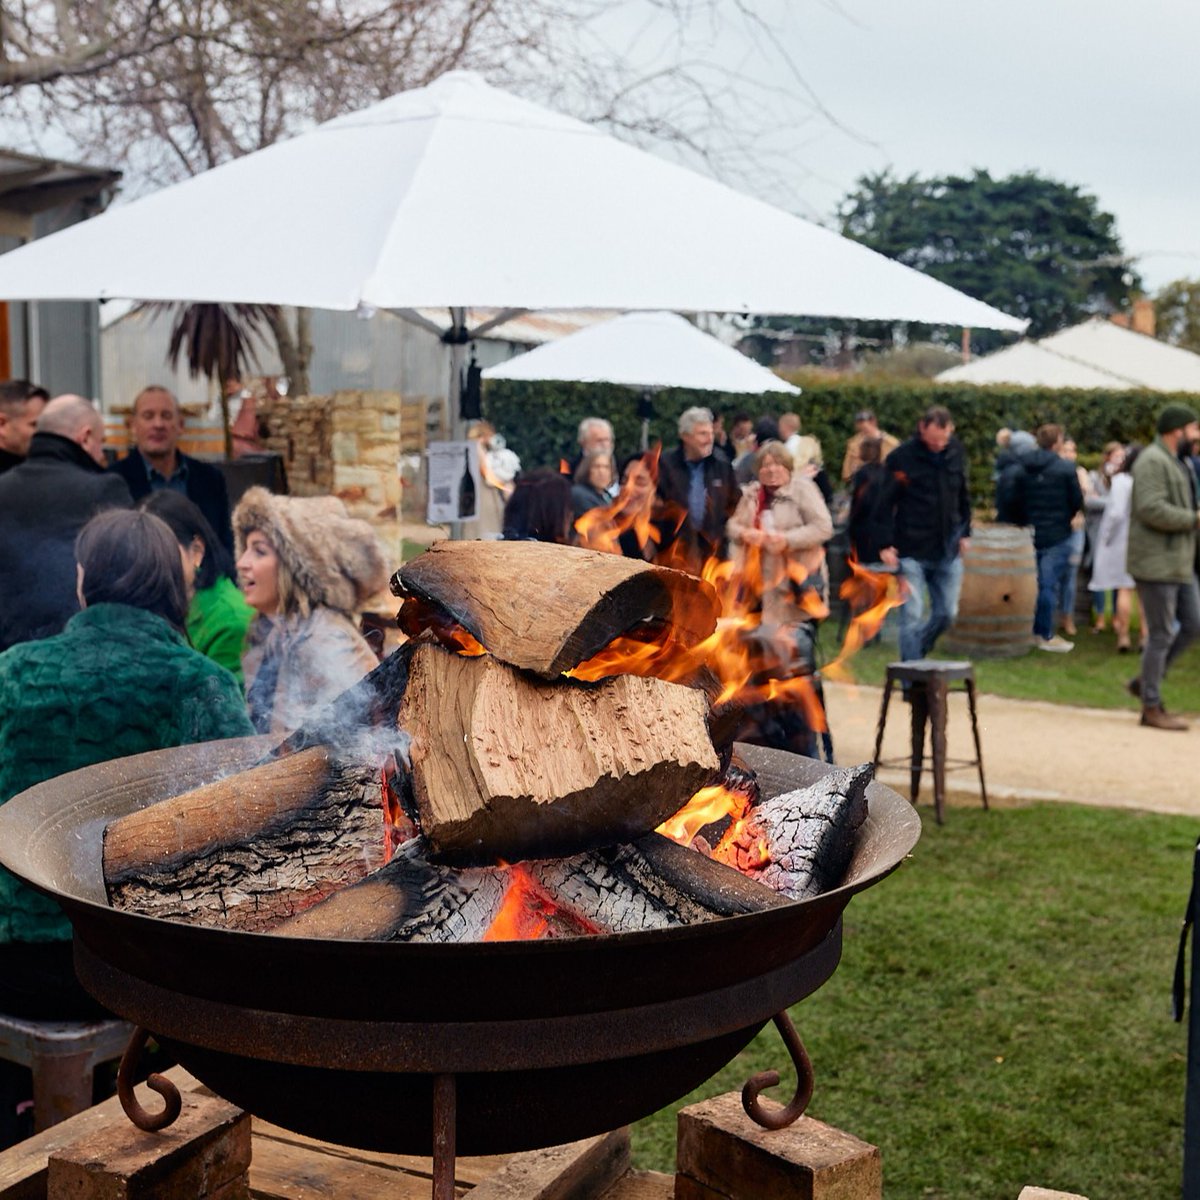 Pack your winter woolies and head to the #AdelaideHills when Winter Reds returns this July! From 28-30 July, @adelhillswine invites you to enjoy a wintry weekend celebrating their famed cool climate drops. Tickets on sale now. bit.ly/3rxJJsL #EventsSouthAustralia